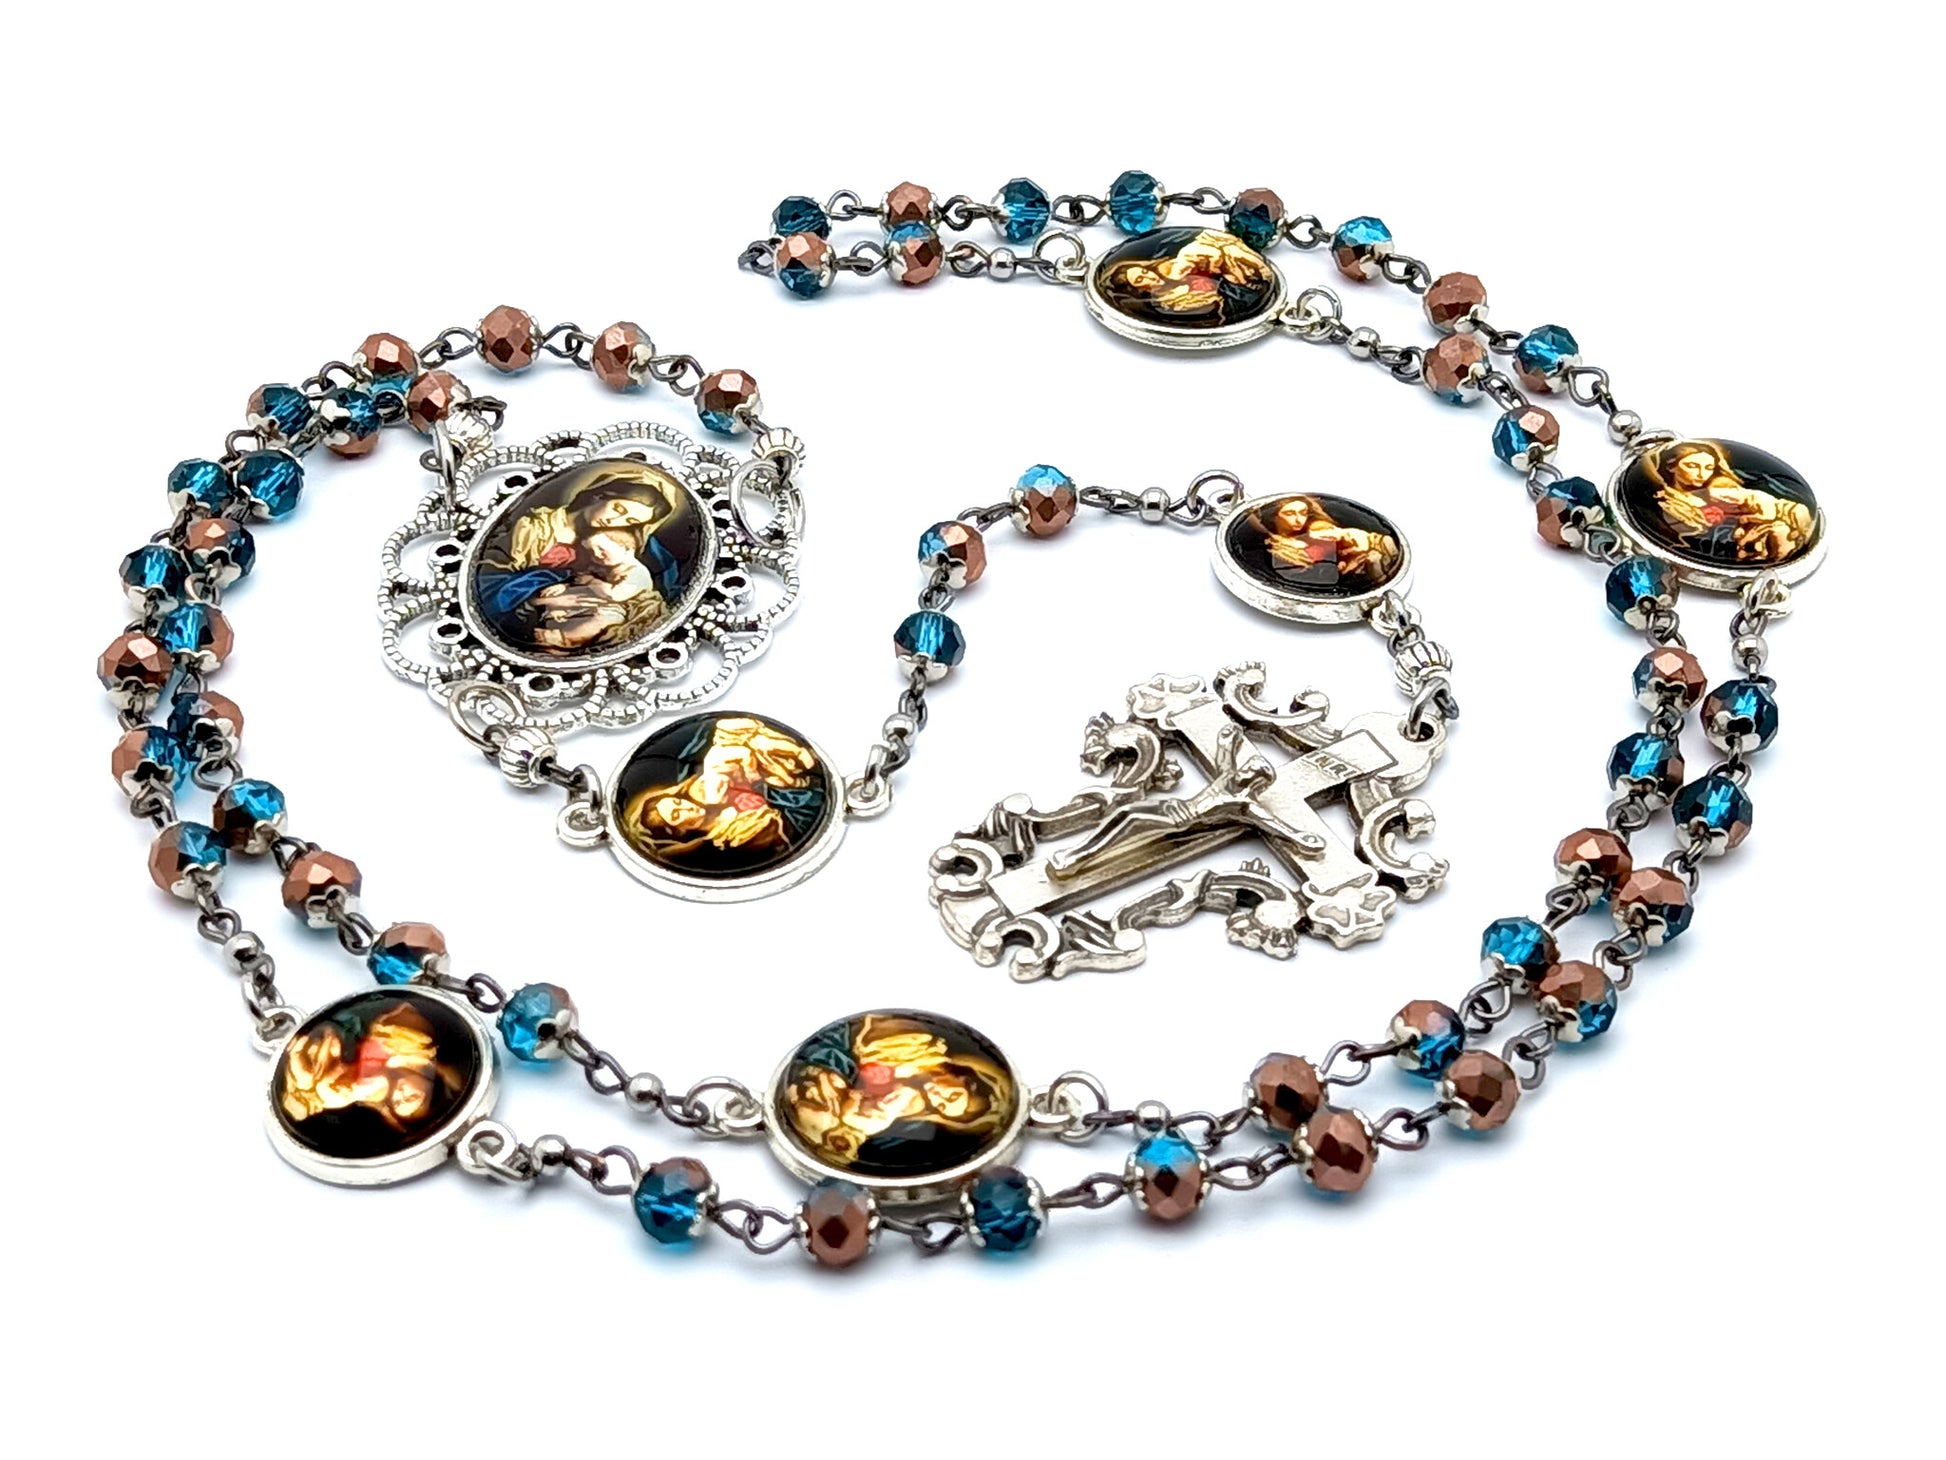 Our Lady of Divine Providence unique rosary beads with glass beads with filigree crucifix and Our Father beads picture medals.